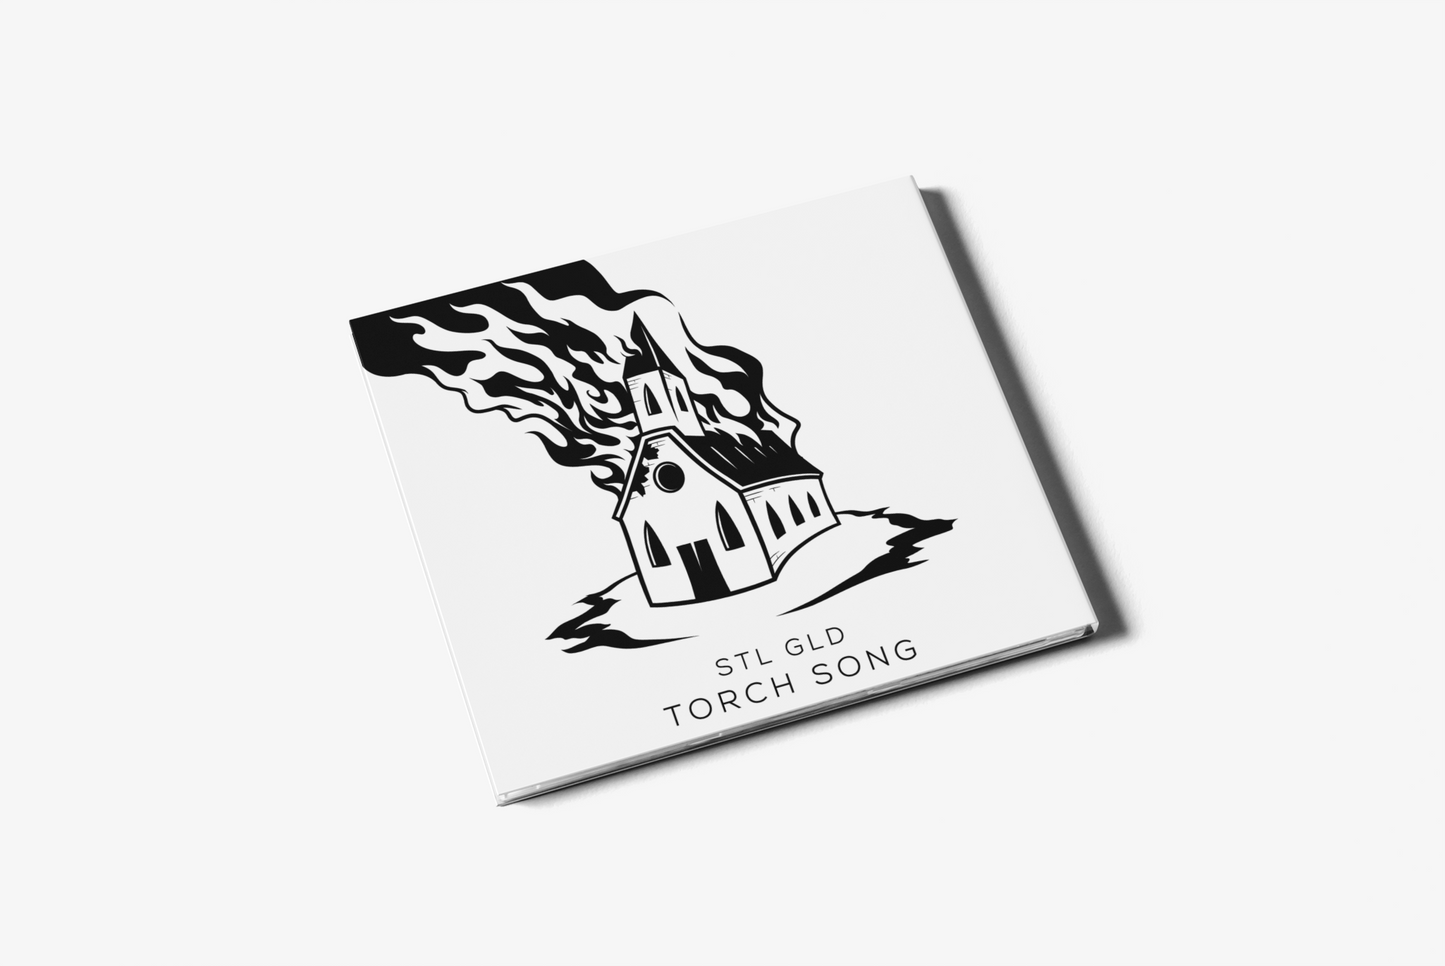 STL GLD – Torch Song Limited Edition CD